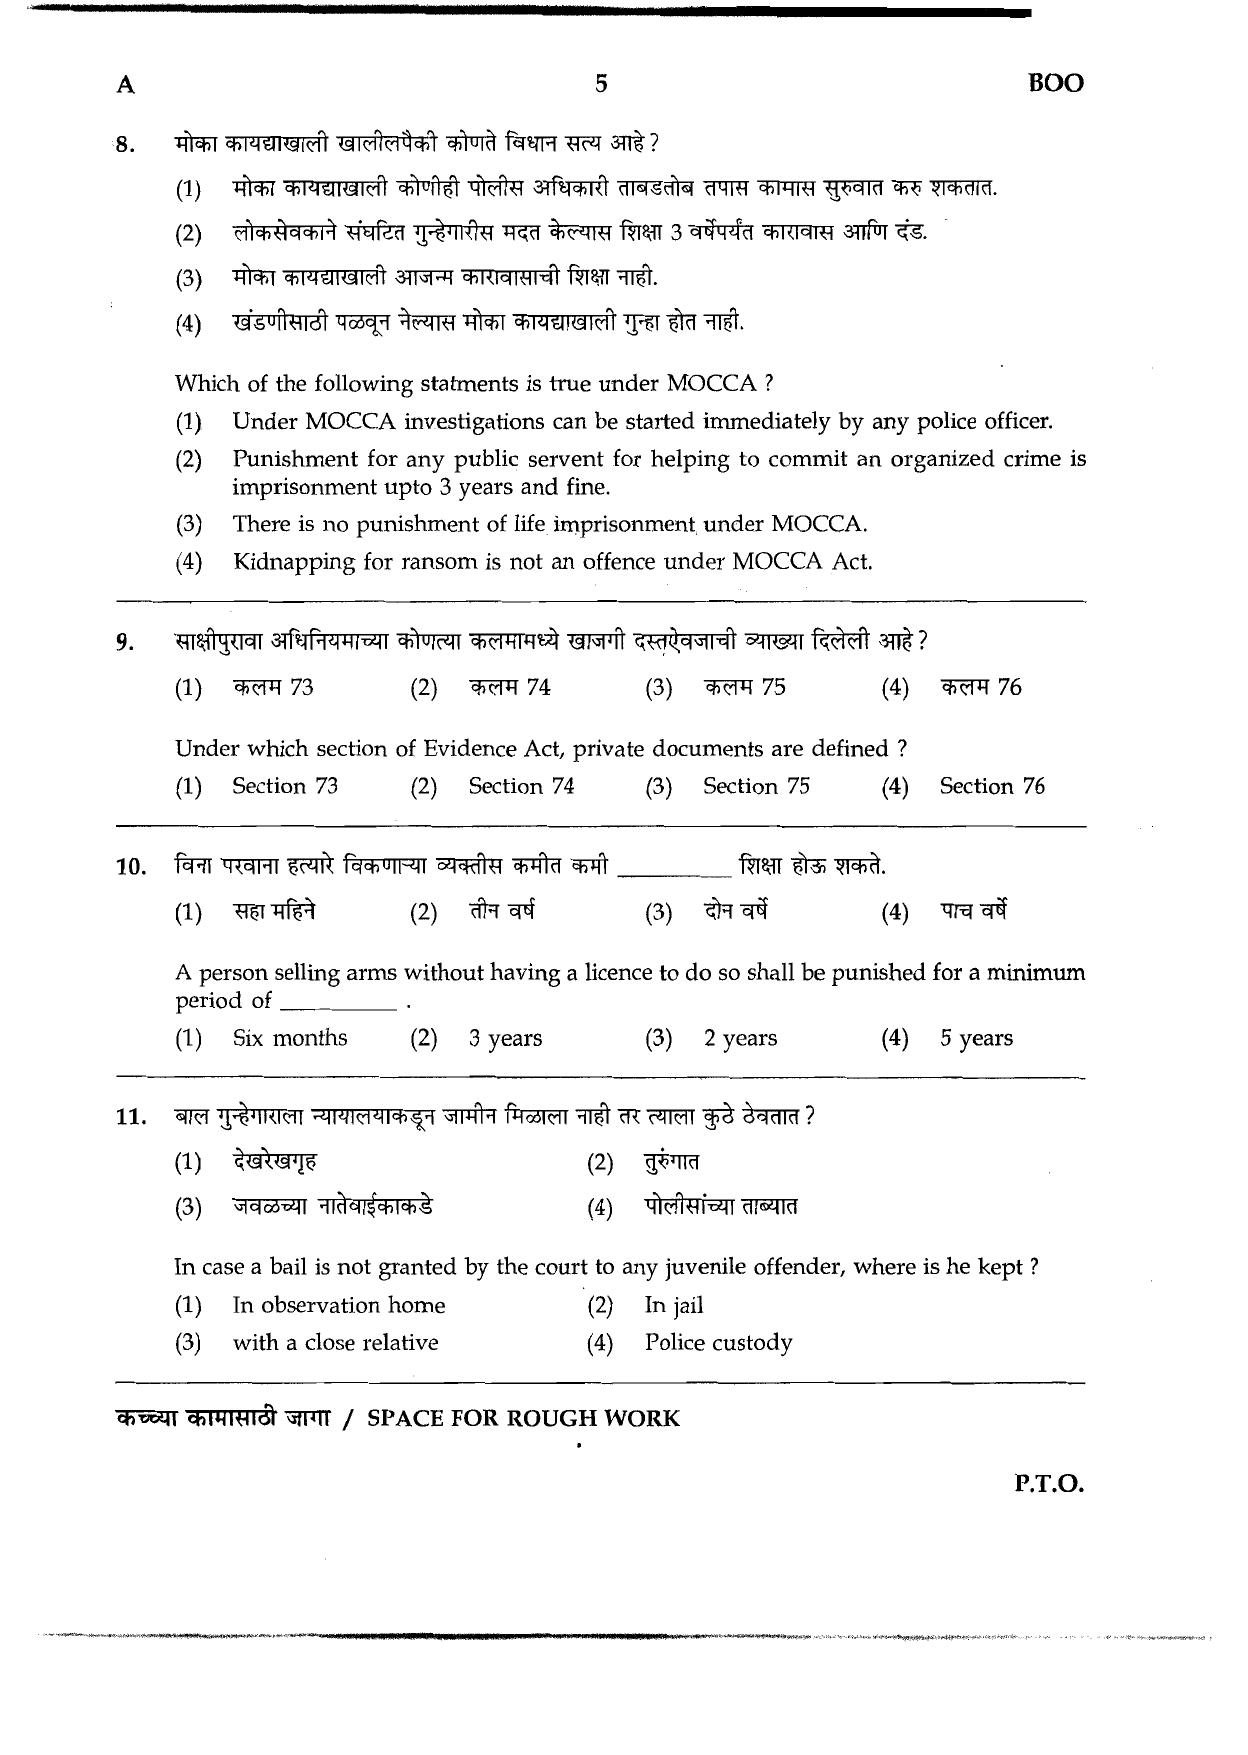 Assam Police LDA, UDA & Other Posts General Knowledge Sample papers - Page 5